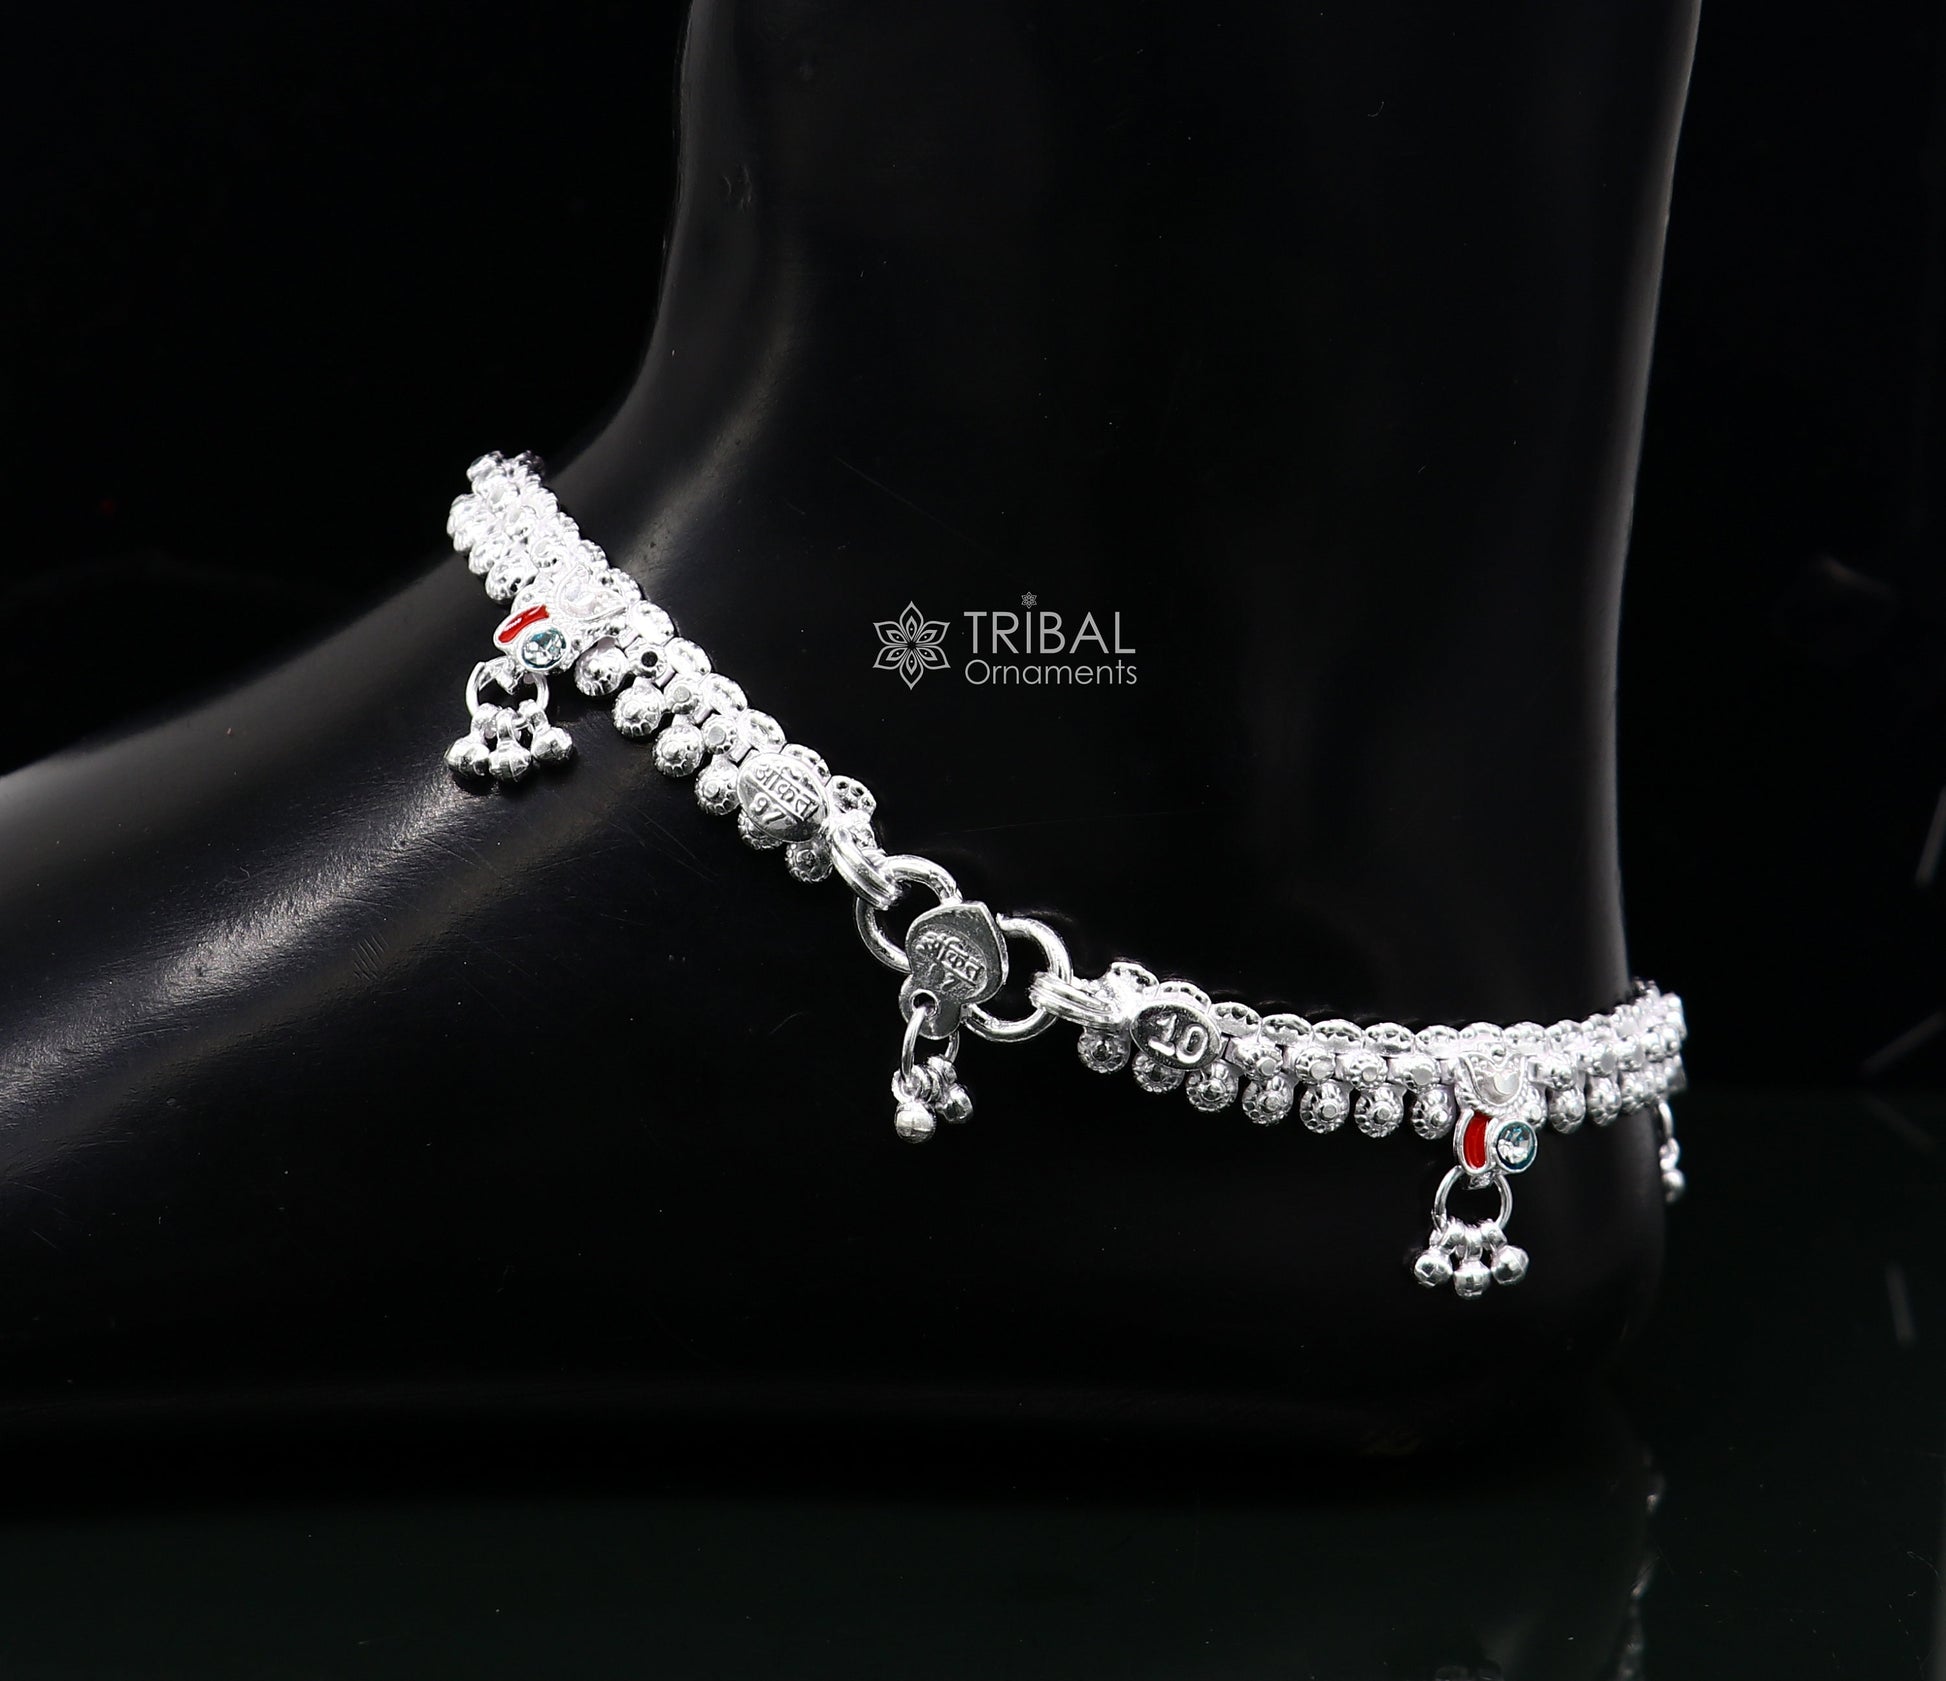 10" ethnic traditional cultural 925 sterling silver handmade vintage design ankle bracelet excellent tribal brides girl's jewelry ank544 - TRIBAL ORNAMENTS